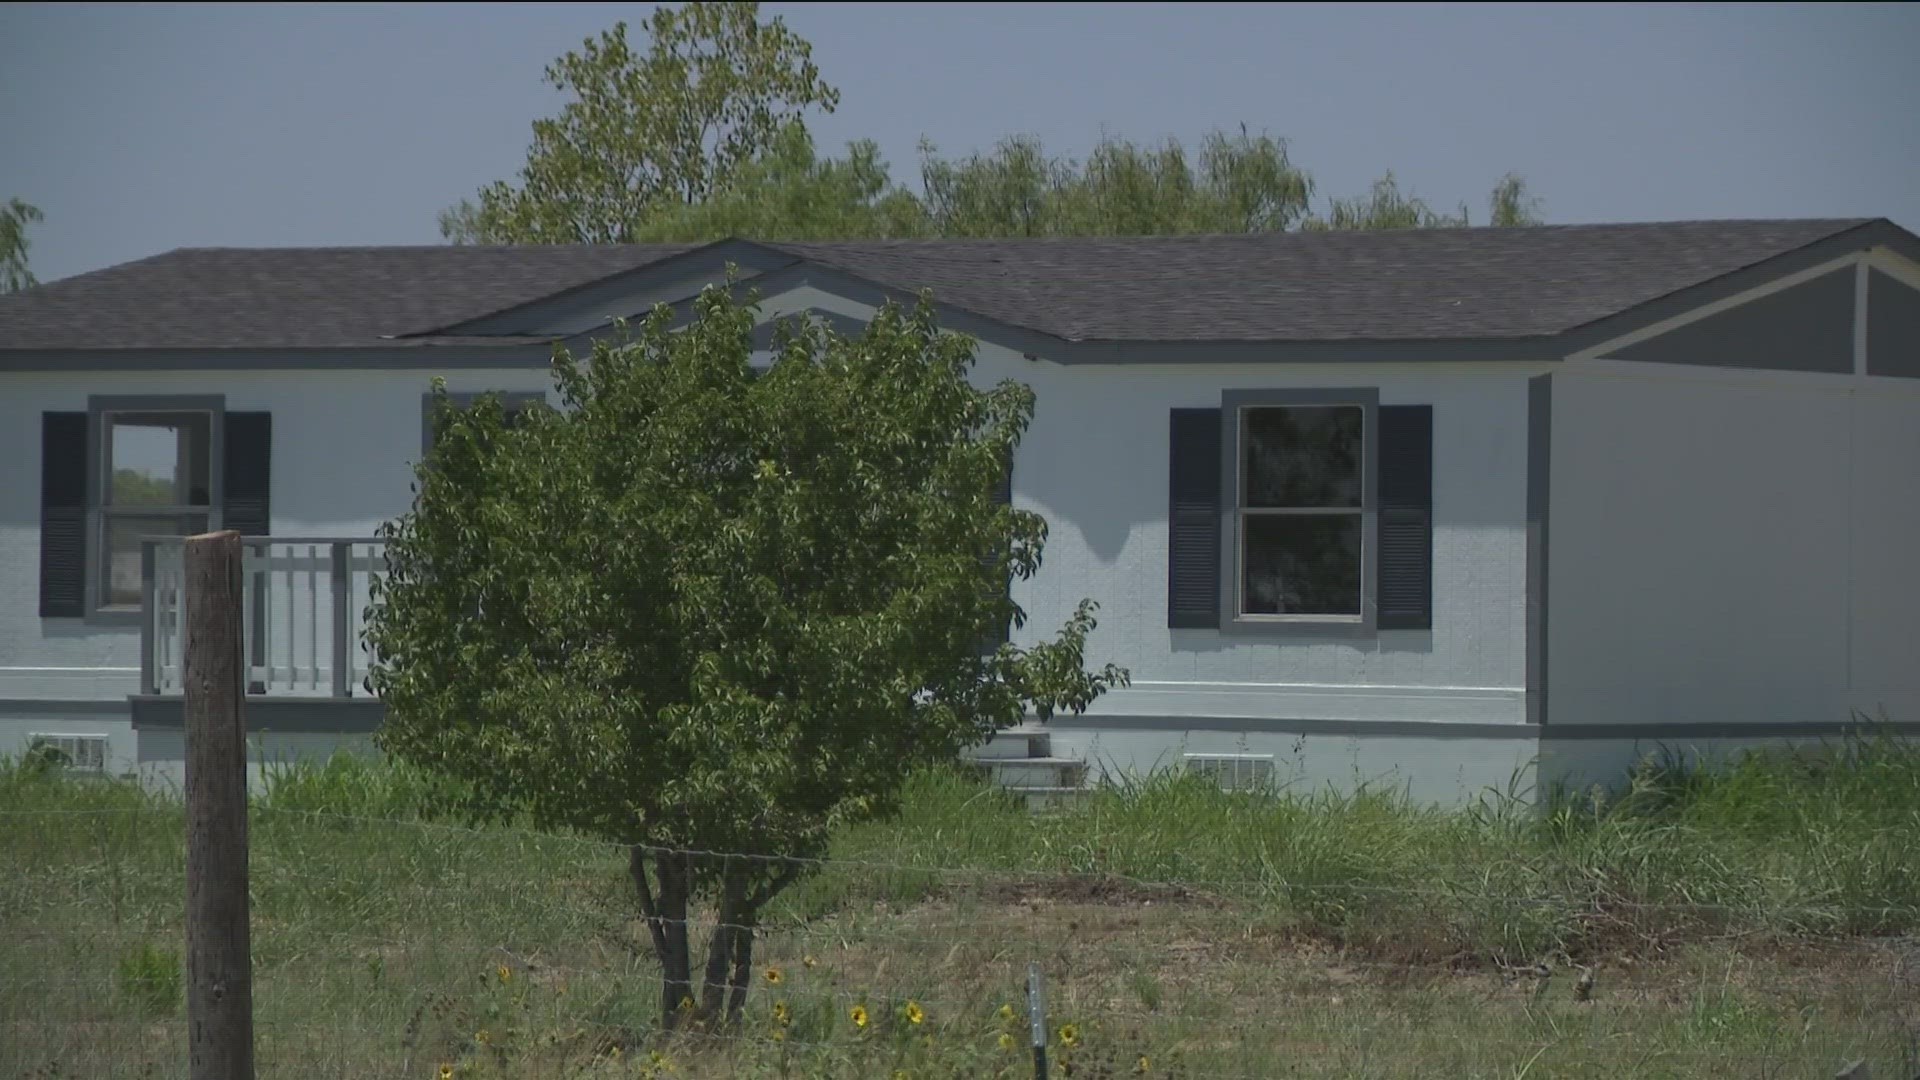 Law enforcement officials are investigating after burned human remains were found on a property in Hays County.